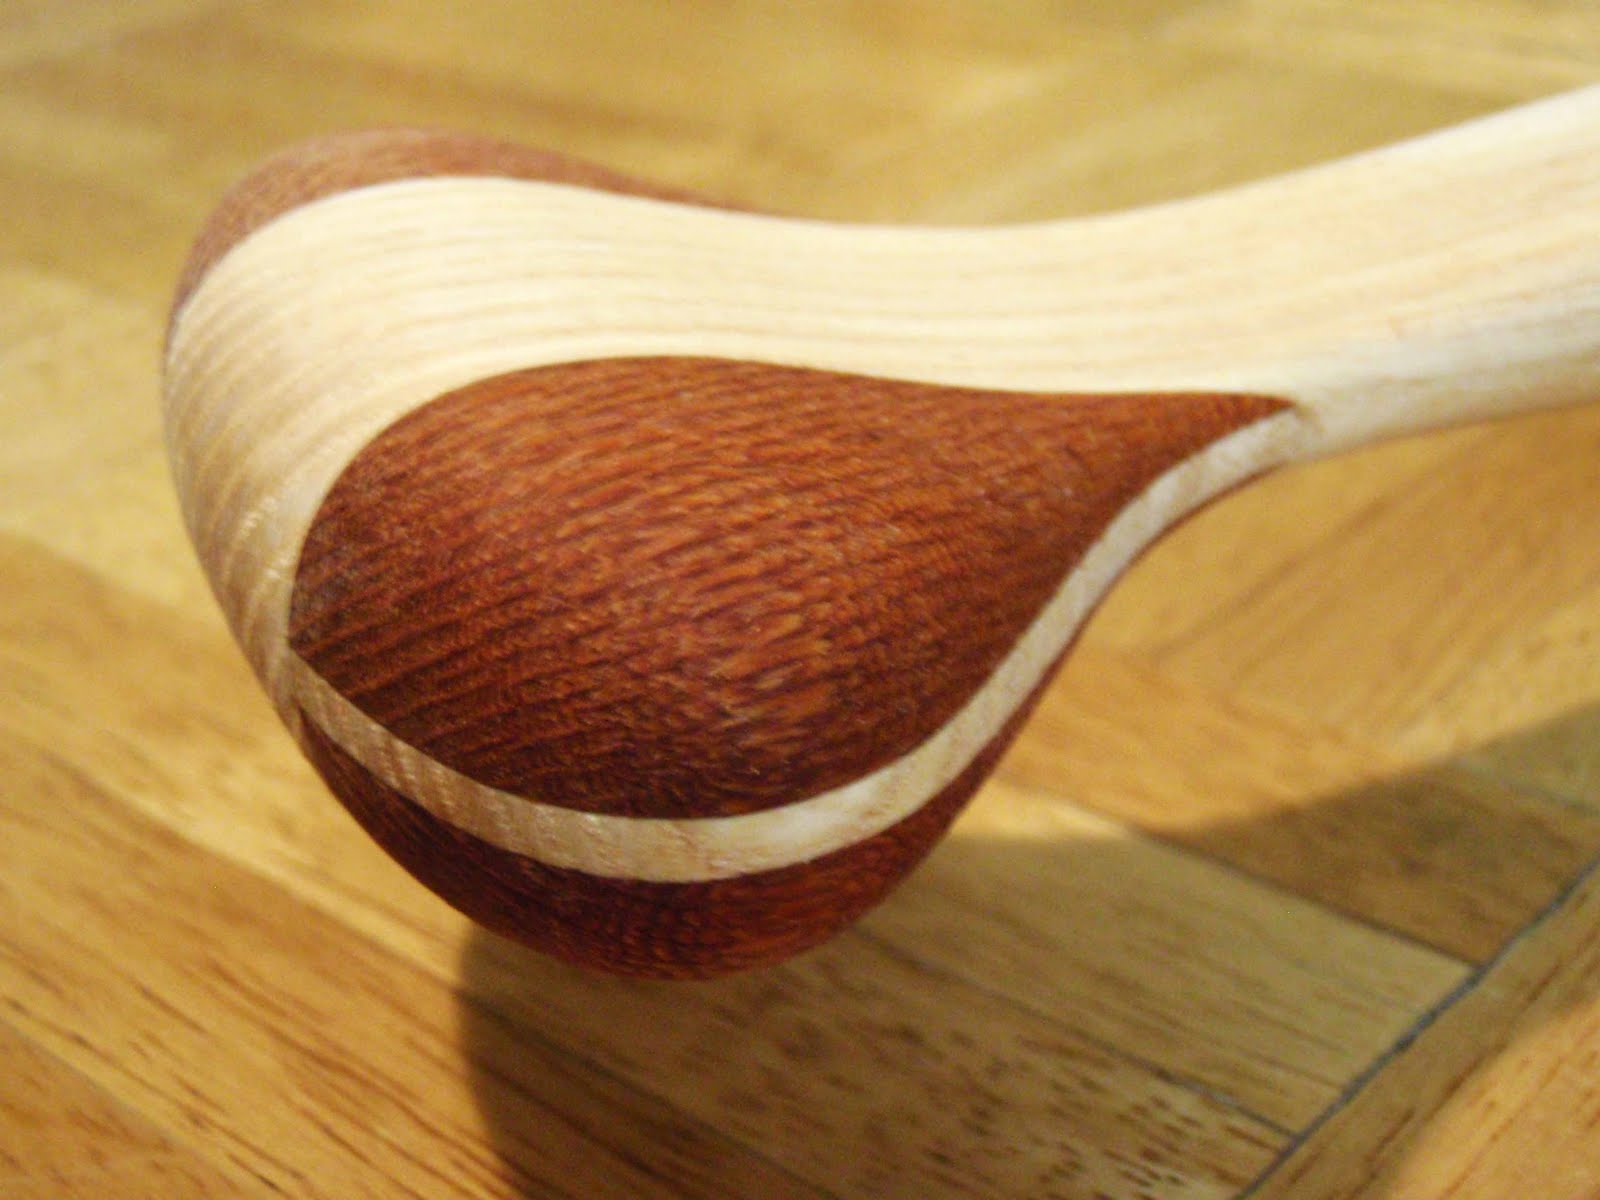  Making (and other canoe stuff): Mark L's Exotic Wood Voyageur Paddle